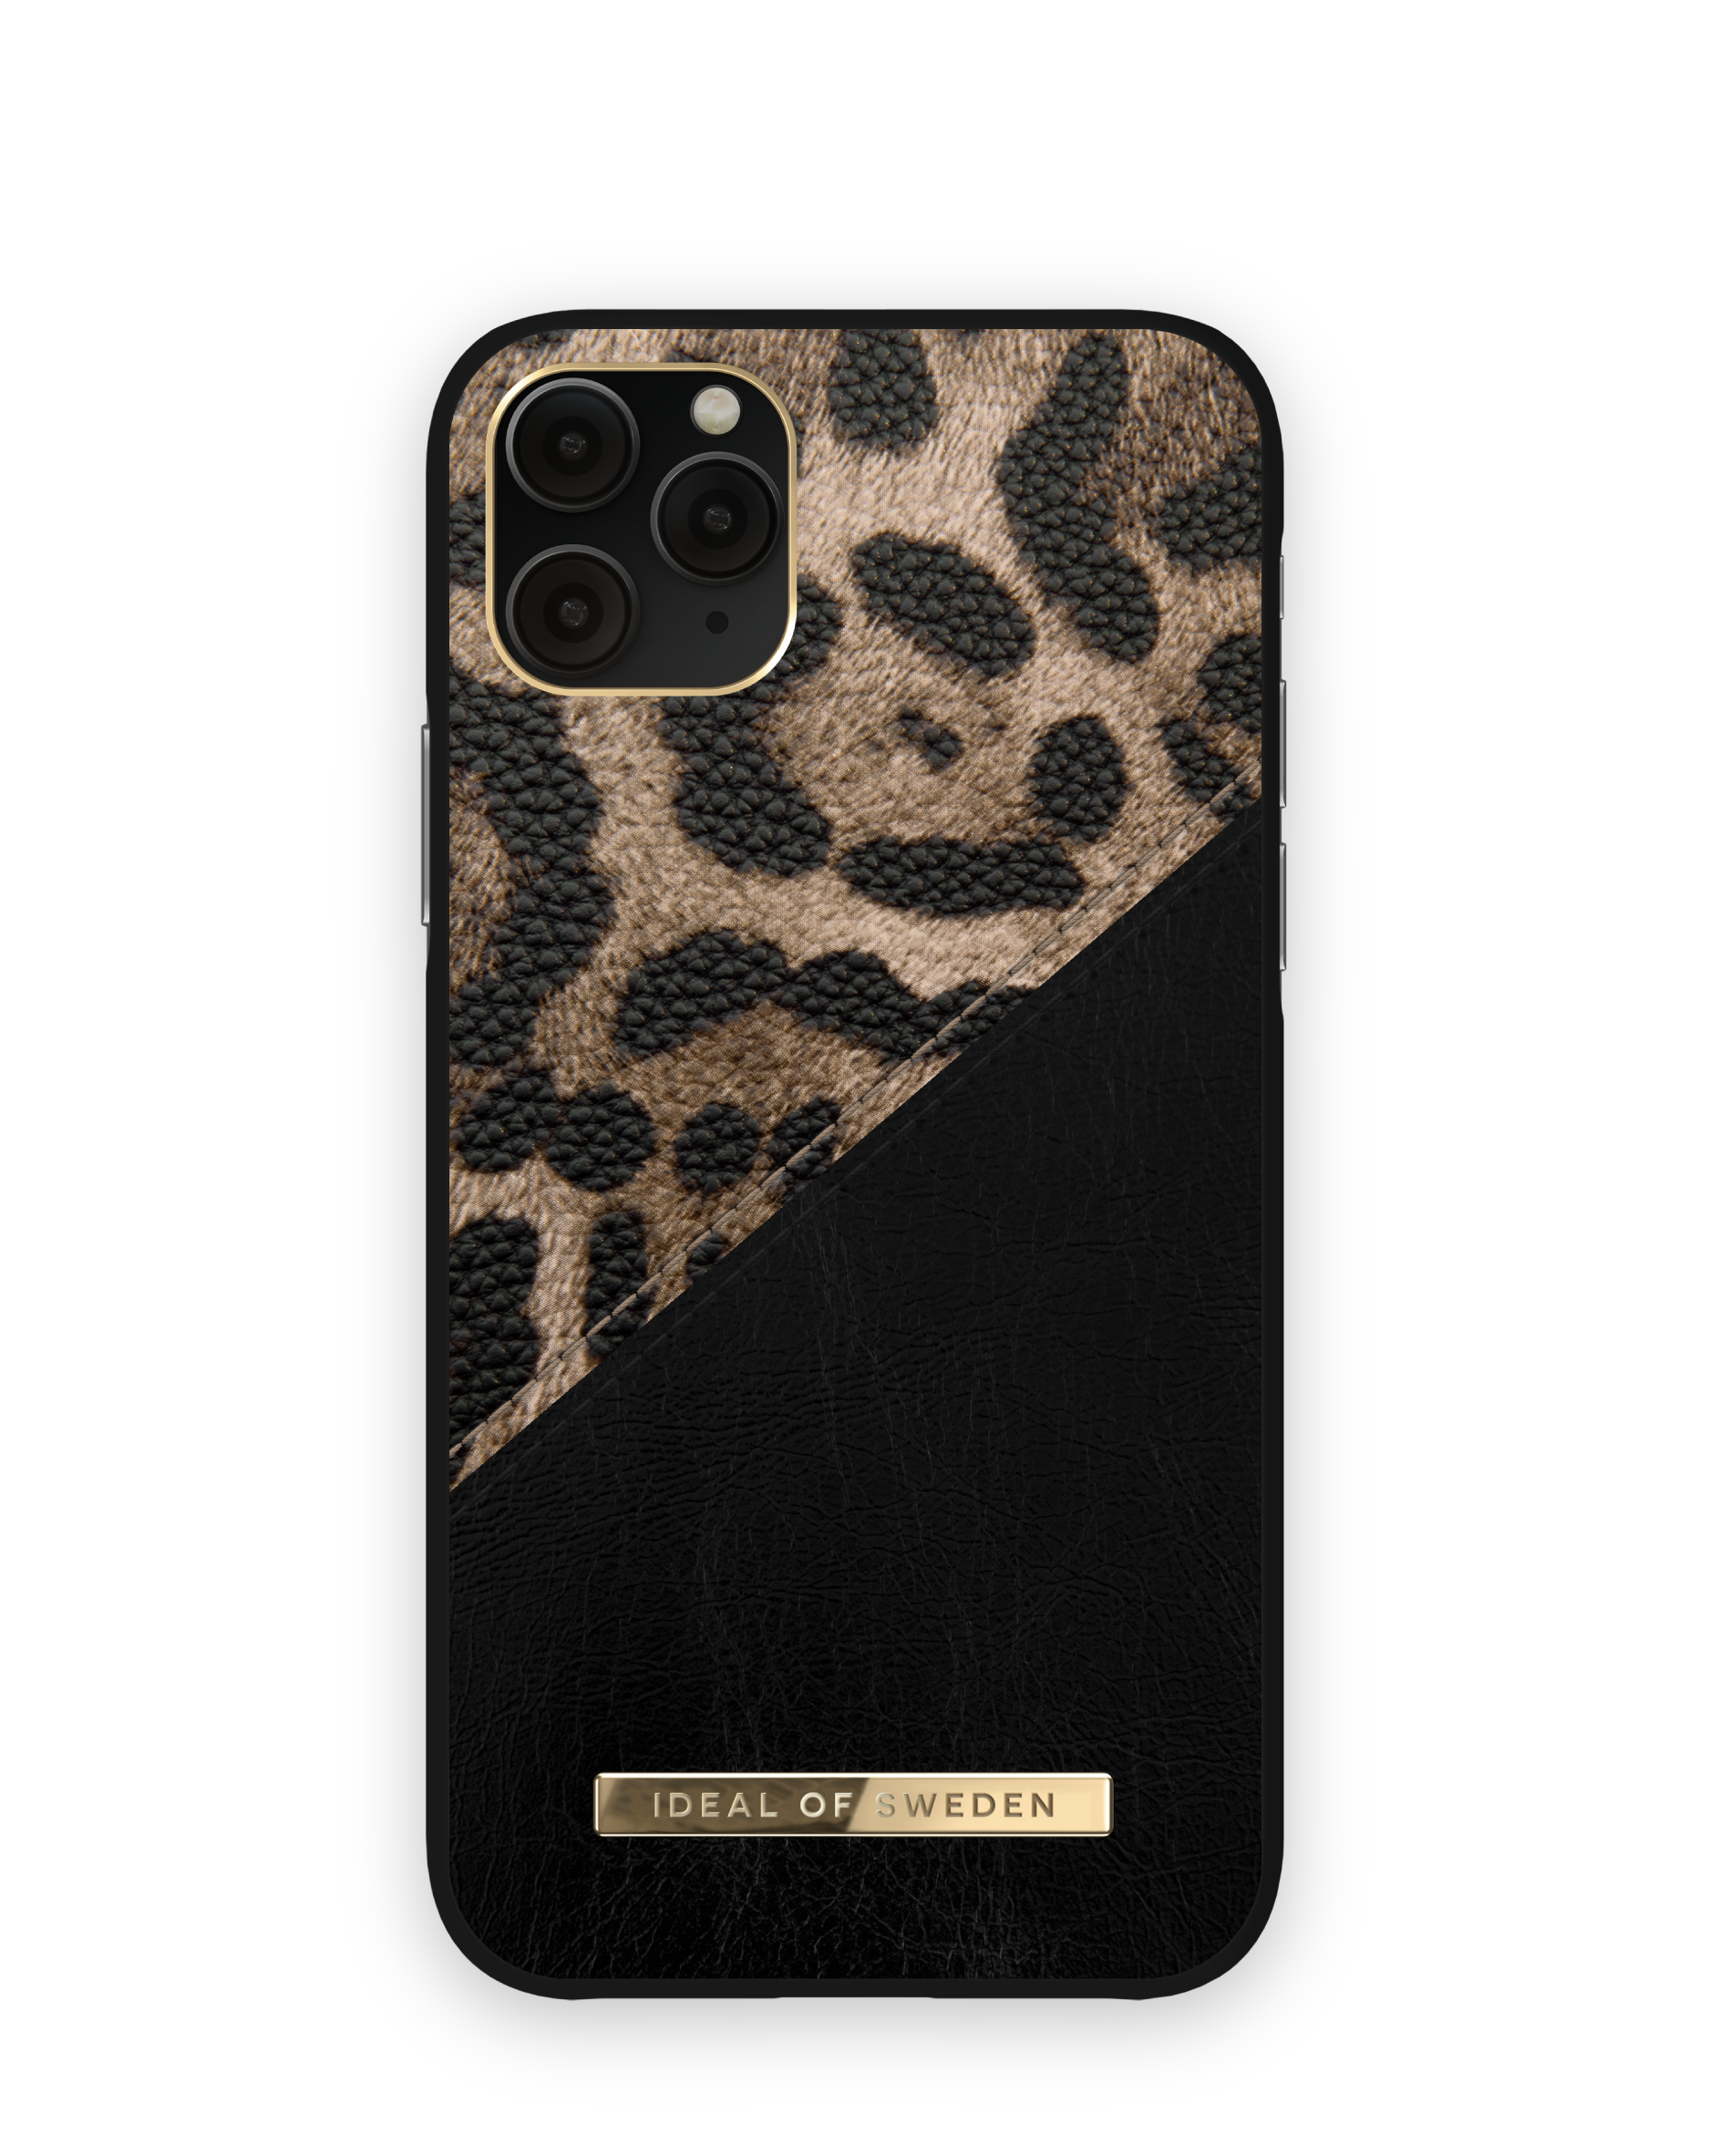 iPhone Leopard Midnight Pro/XS/X, 11 Apple, Backcover, SWEDEN IDEAL IDACAW21-I1958-330, OF